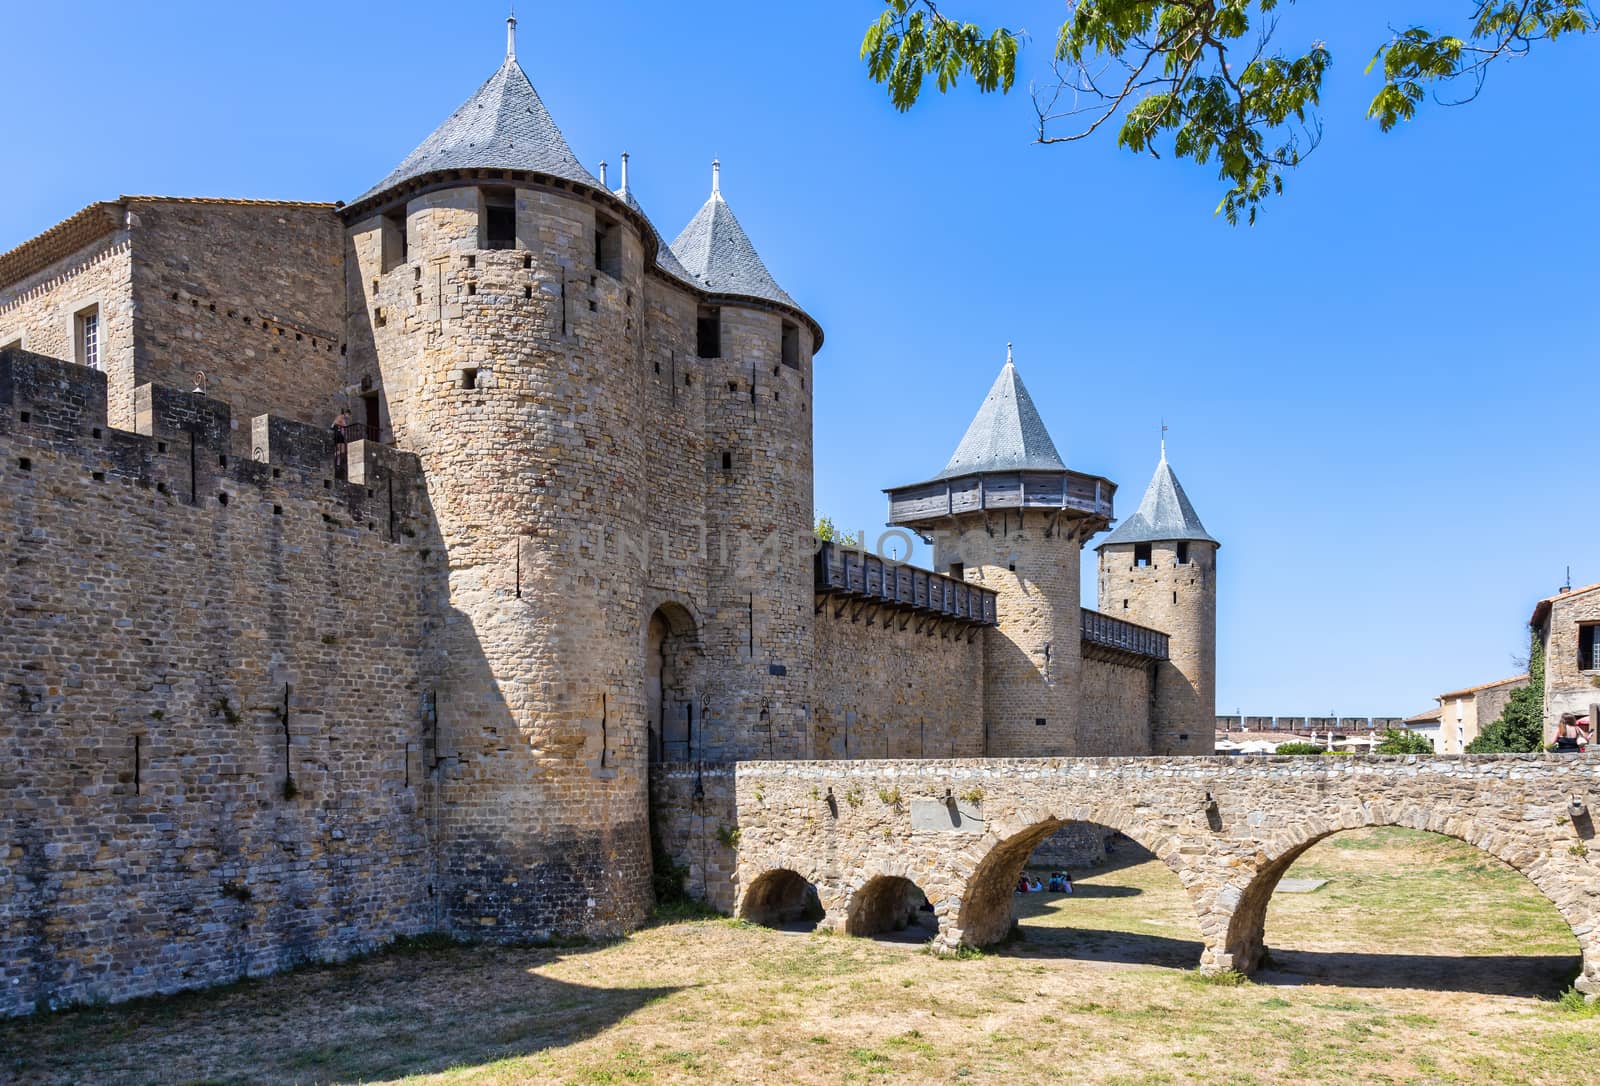 View of famous old castle of Carcassonne in France. by Digoarpi